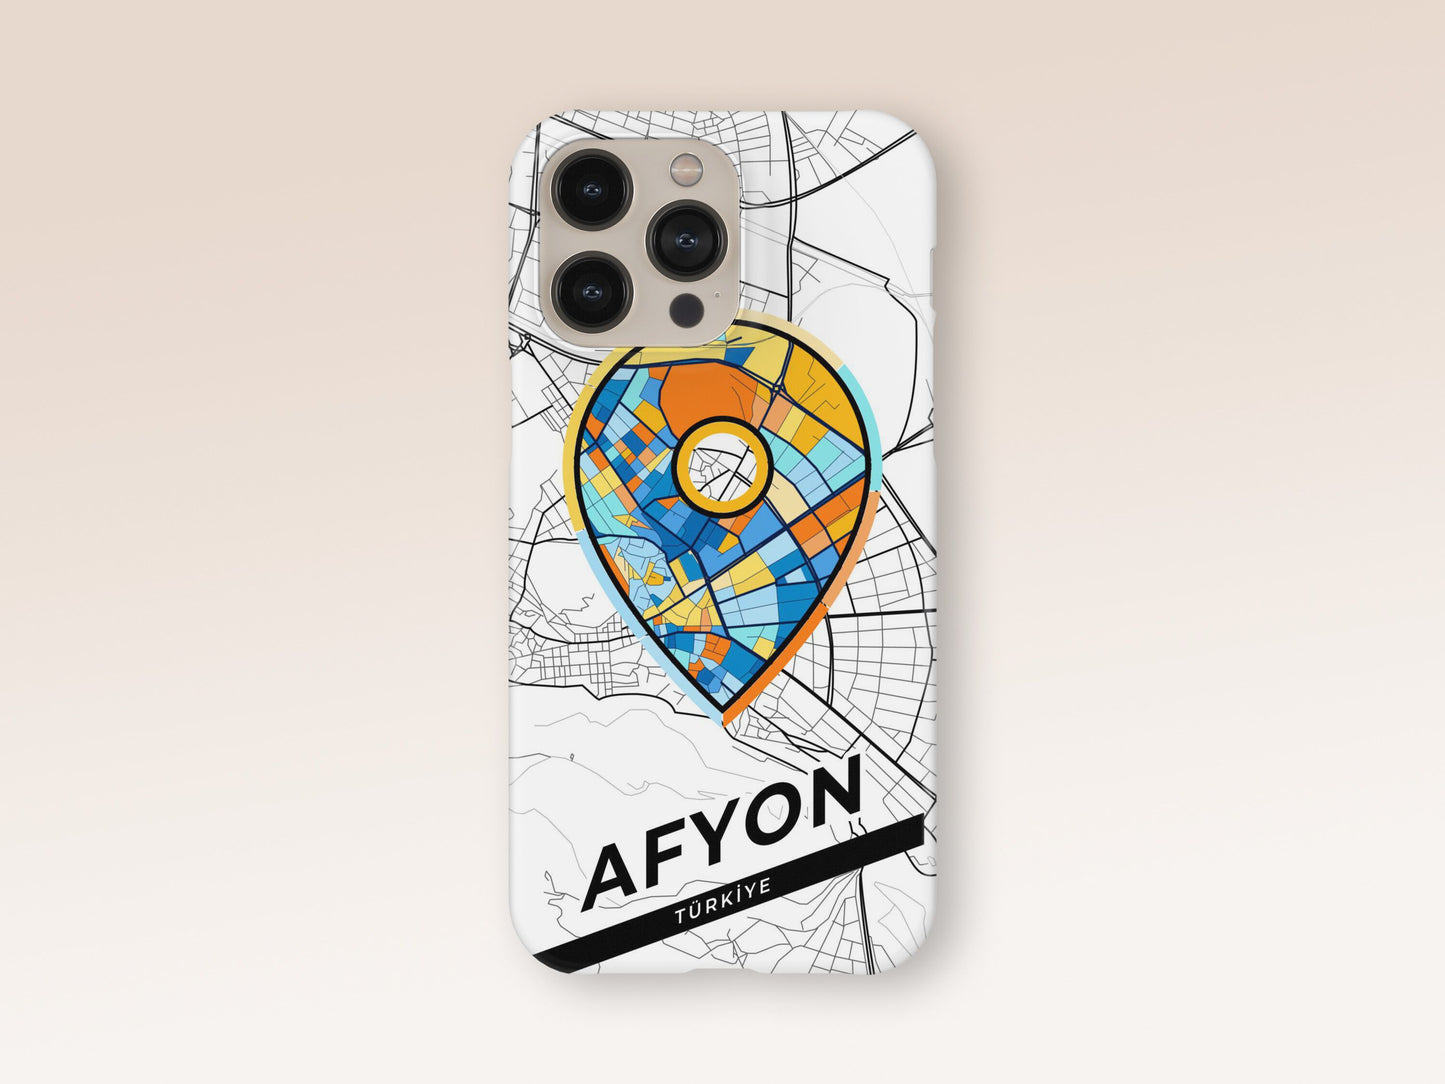 Afyon Turkey slim phone case with colorful icon. Birthday, wedding or housewarming gift. Couple match cases. 1